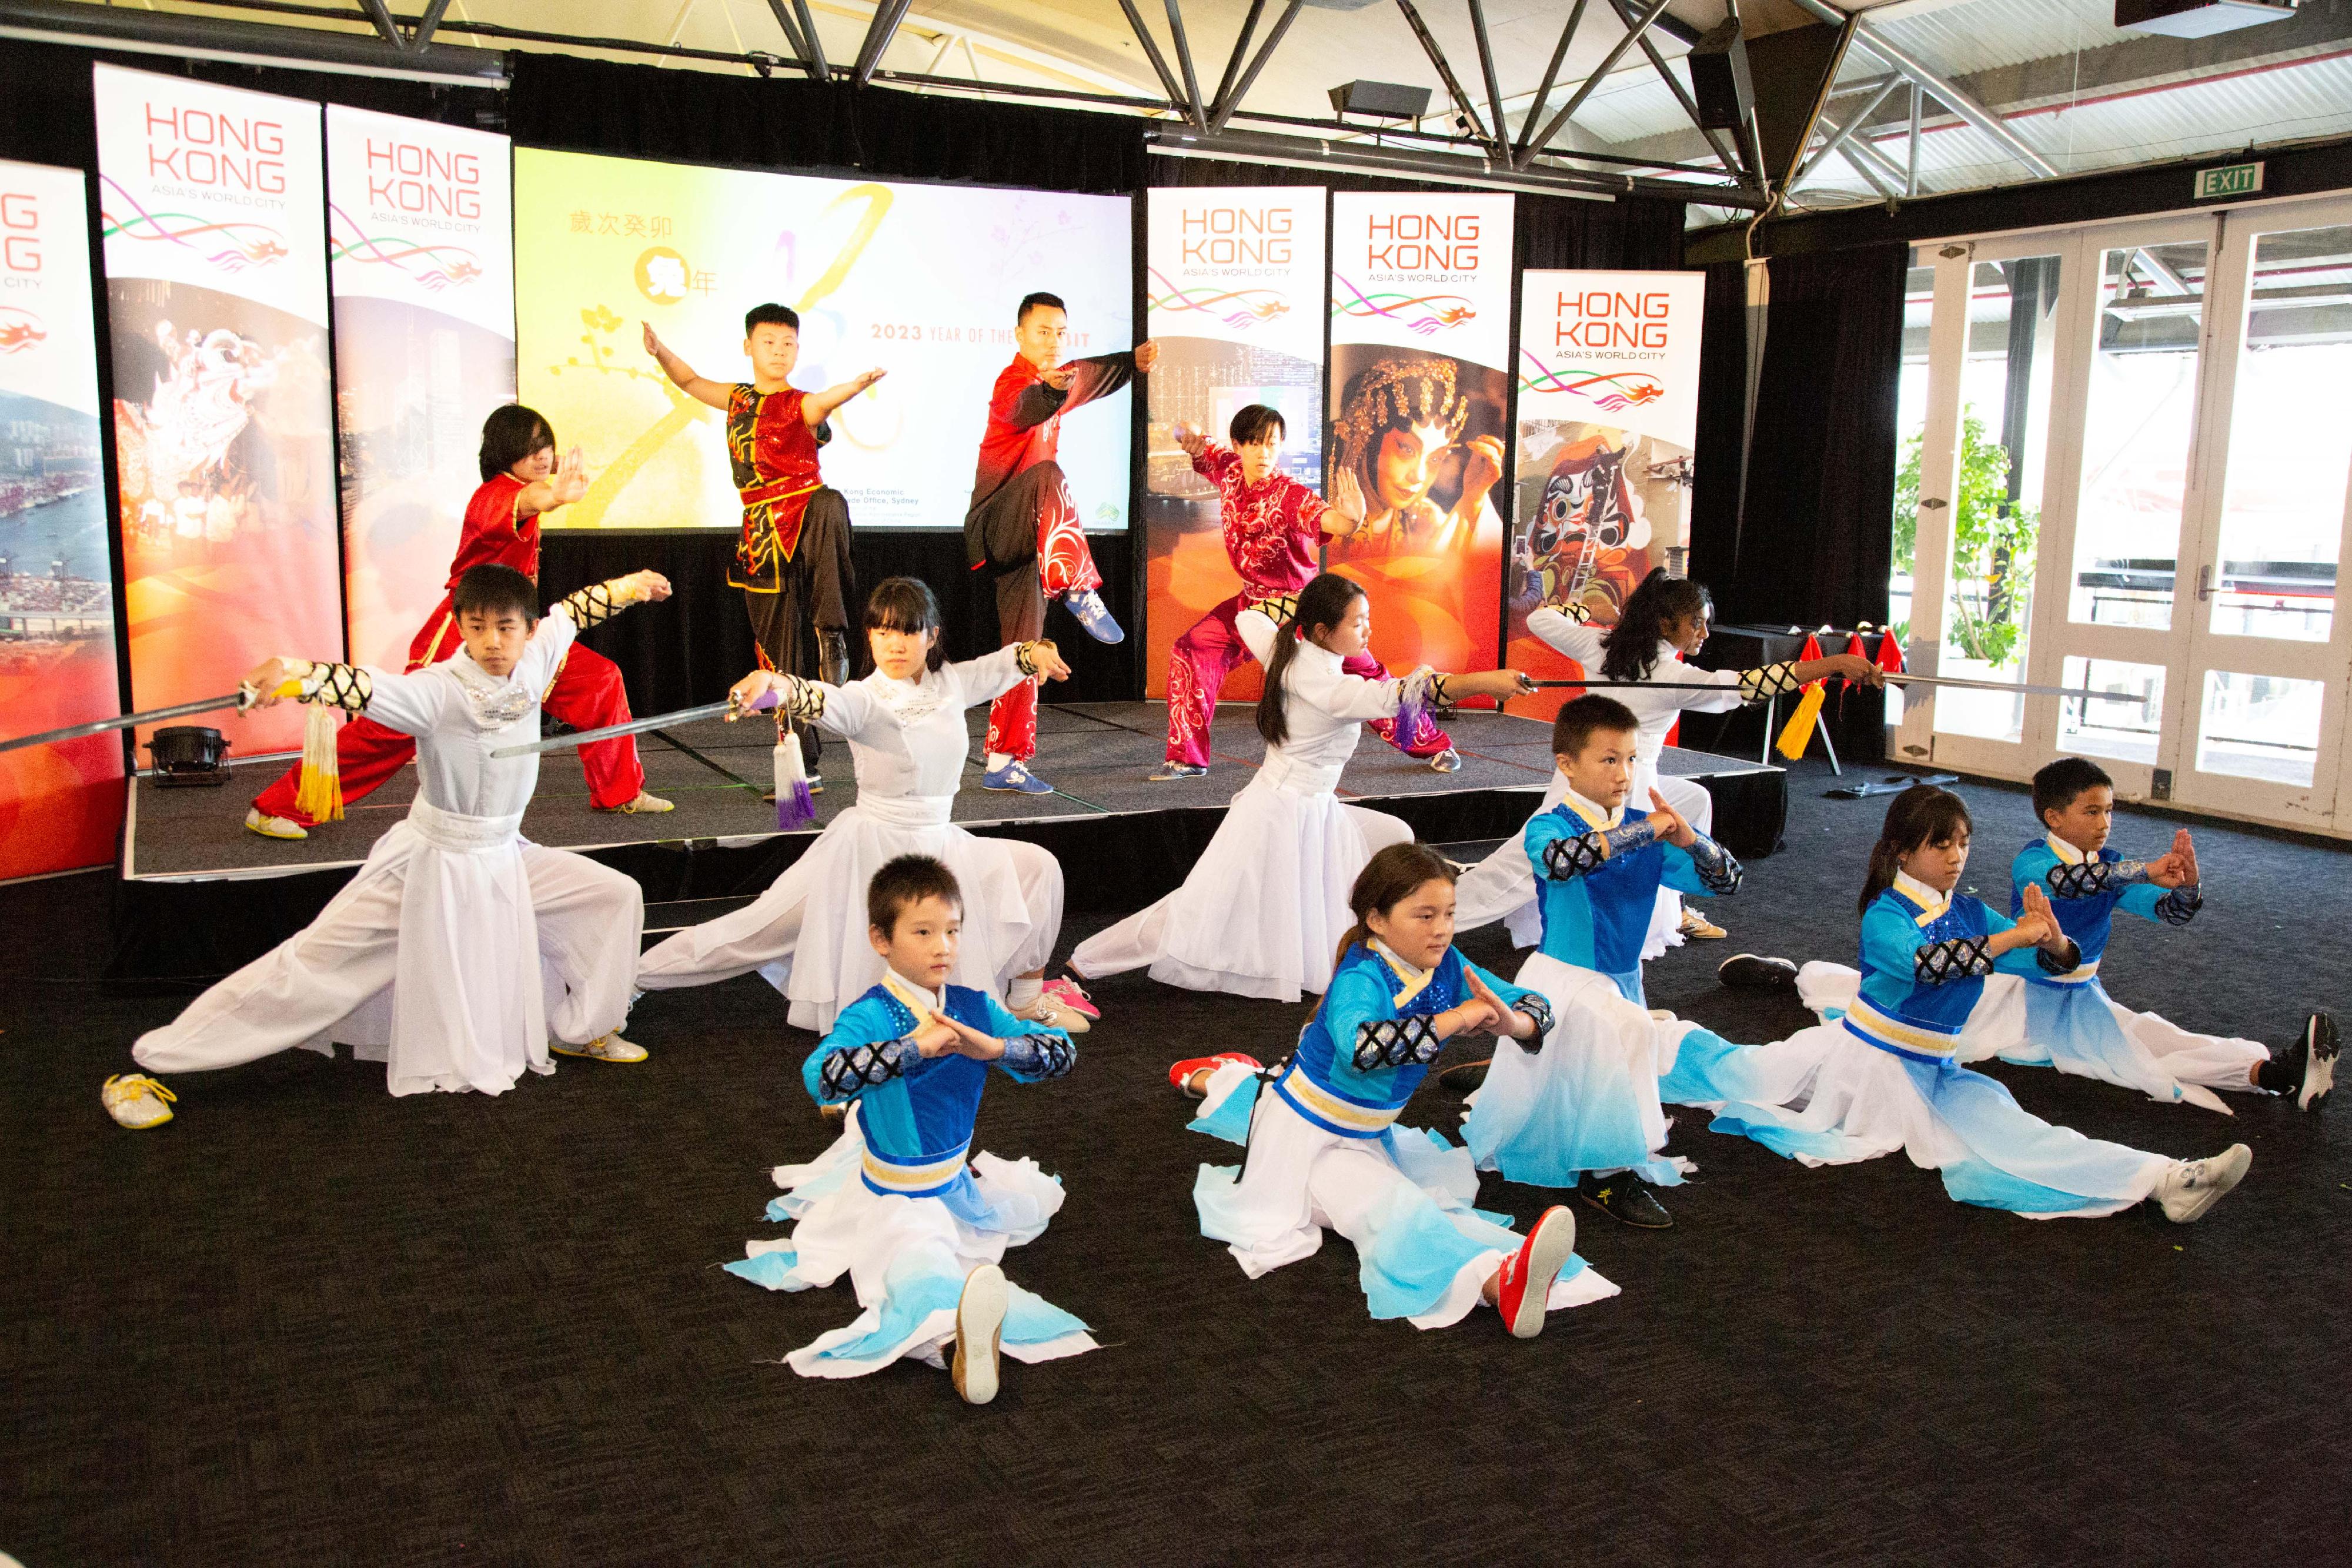 The Hong Kong Economic and Trade Office, Sydney hosted a reception in Auckland, New Zealand, today (March 7) to celebrate the Year of the Rabbit. Photo shows a martial arts performance staged at the reception.